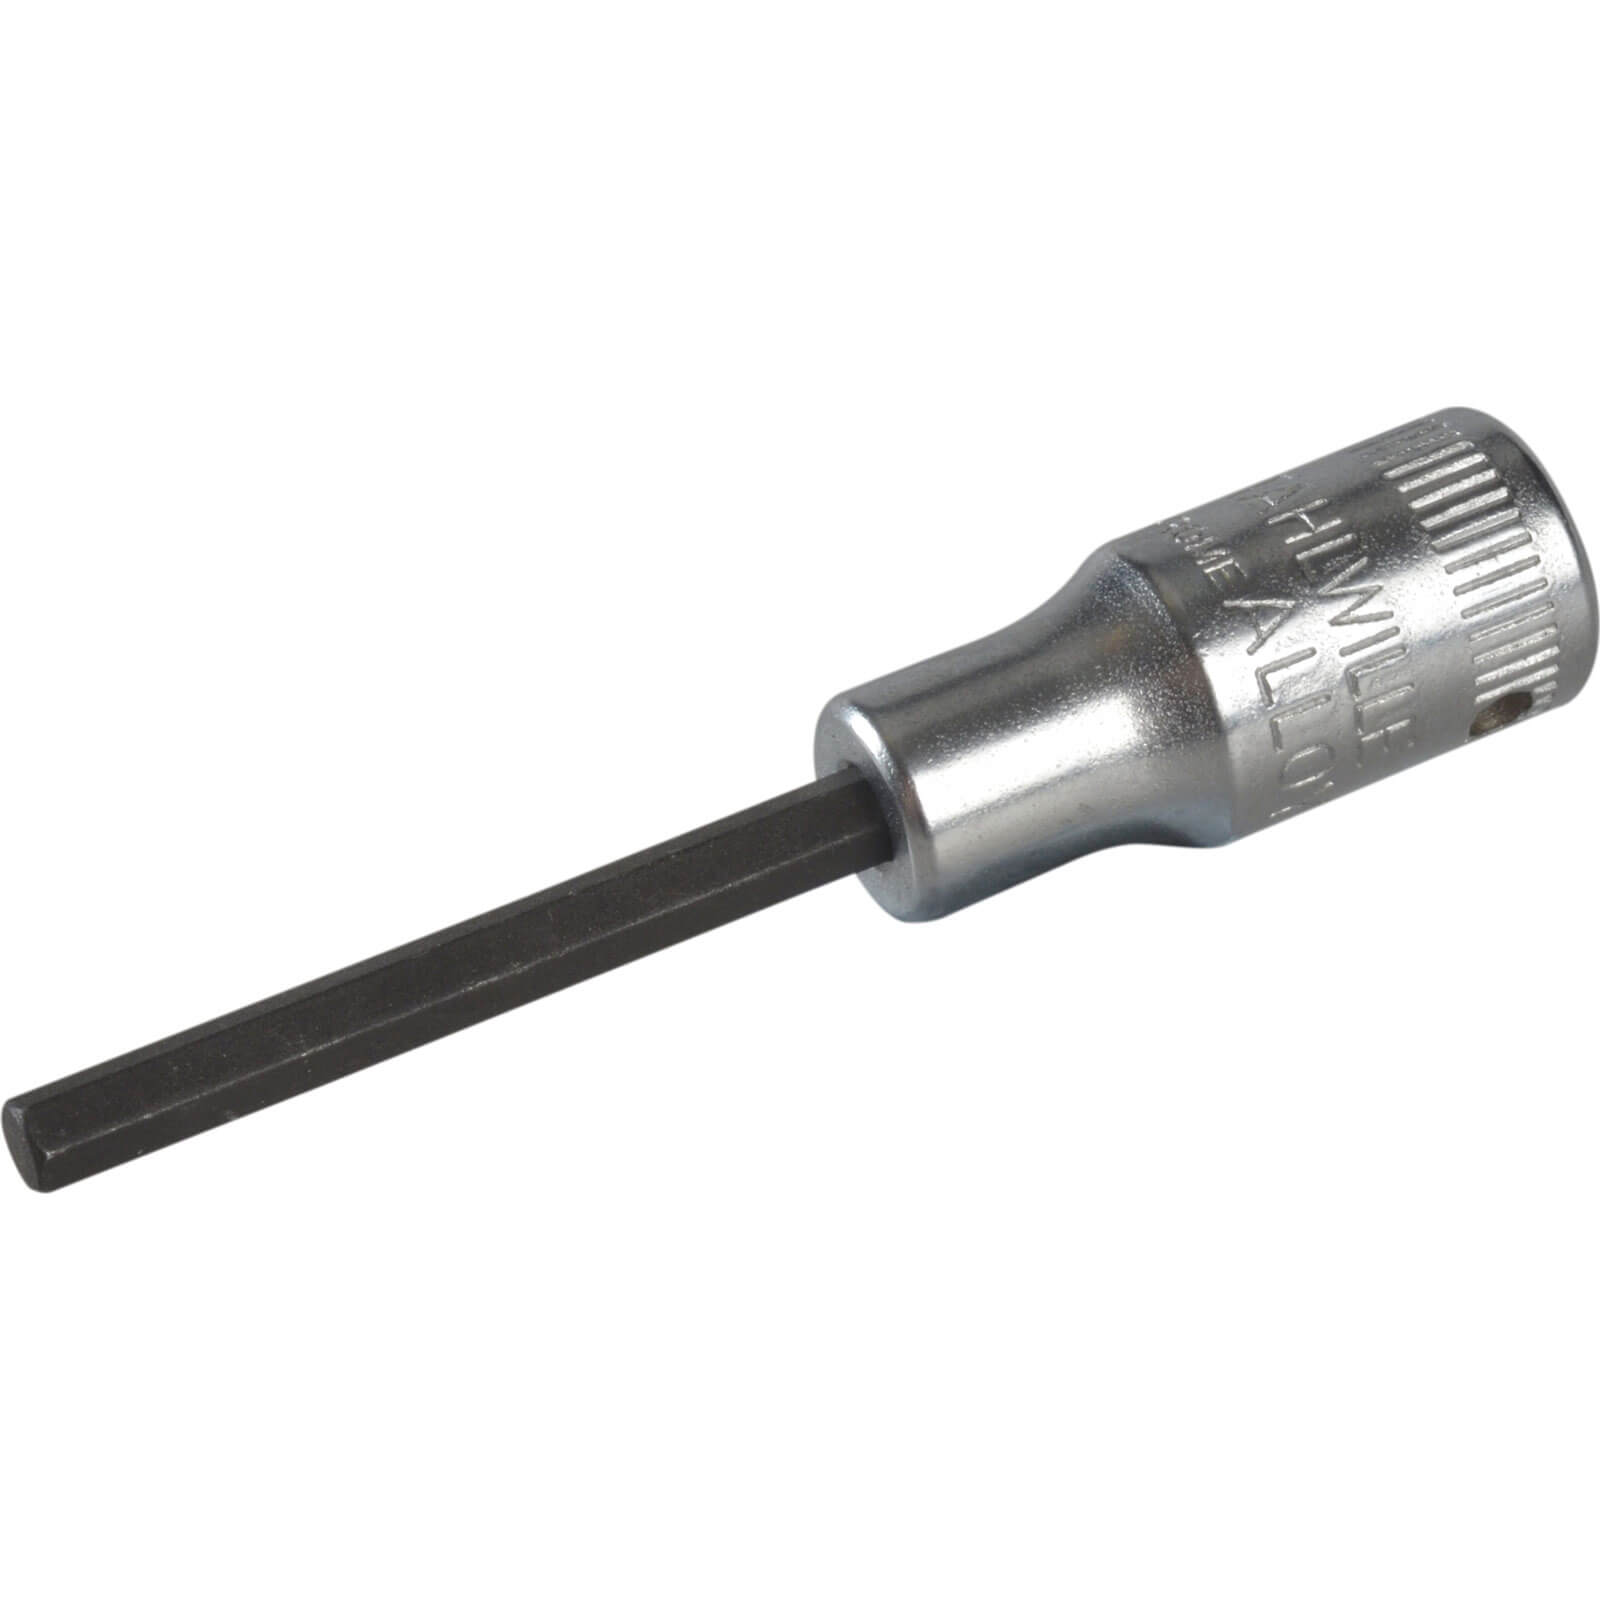 Image of Stahlwille 1/4" Drive Hexagon Socket Bit Imperial 1/4" 5/32"